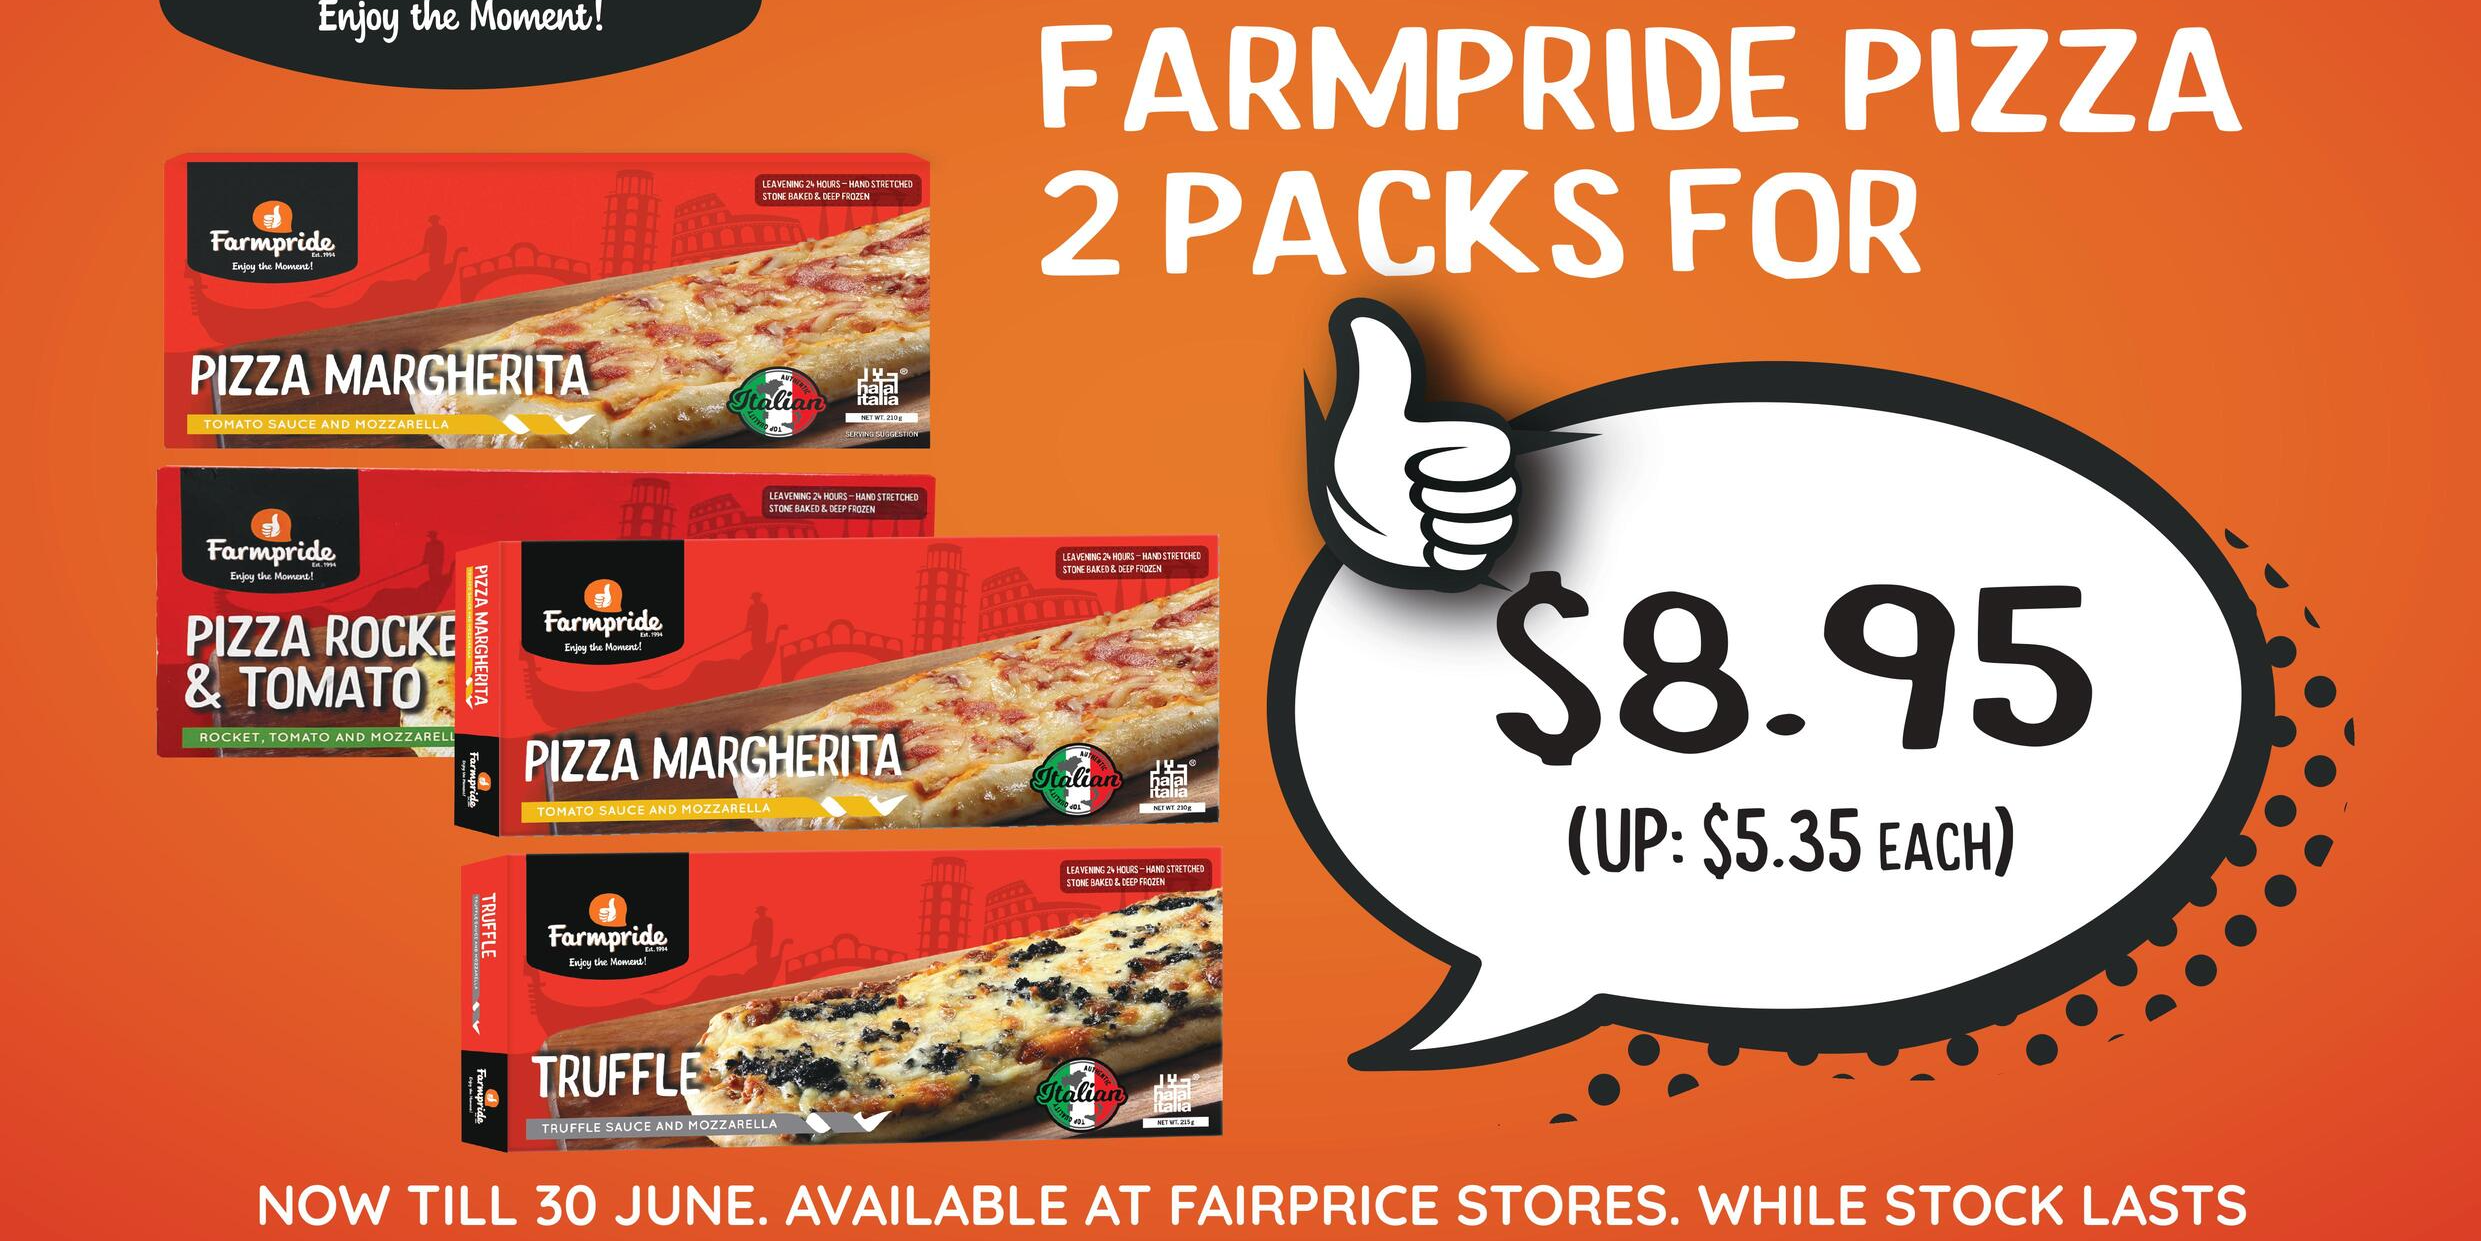 2 packs of Farmpride Pizzas at only $8.95 you can conveniently prepare for your kids this school hol